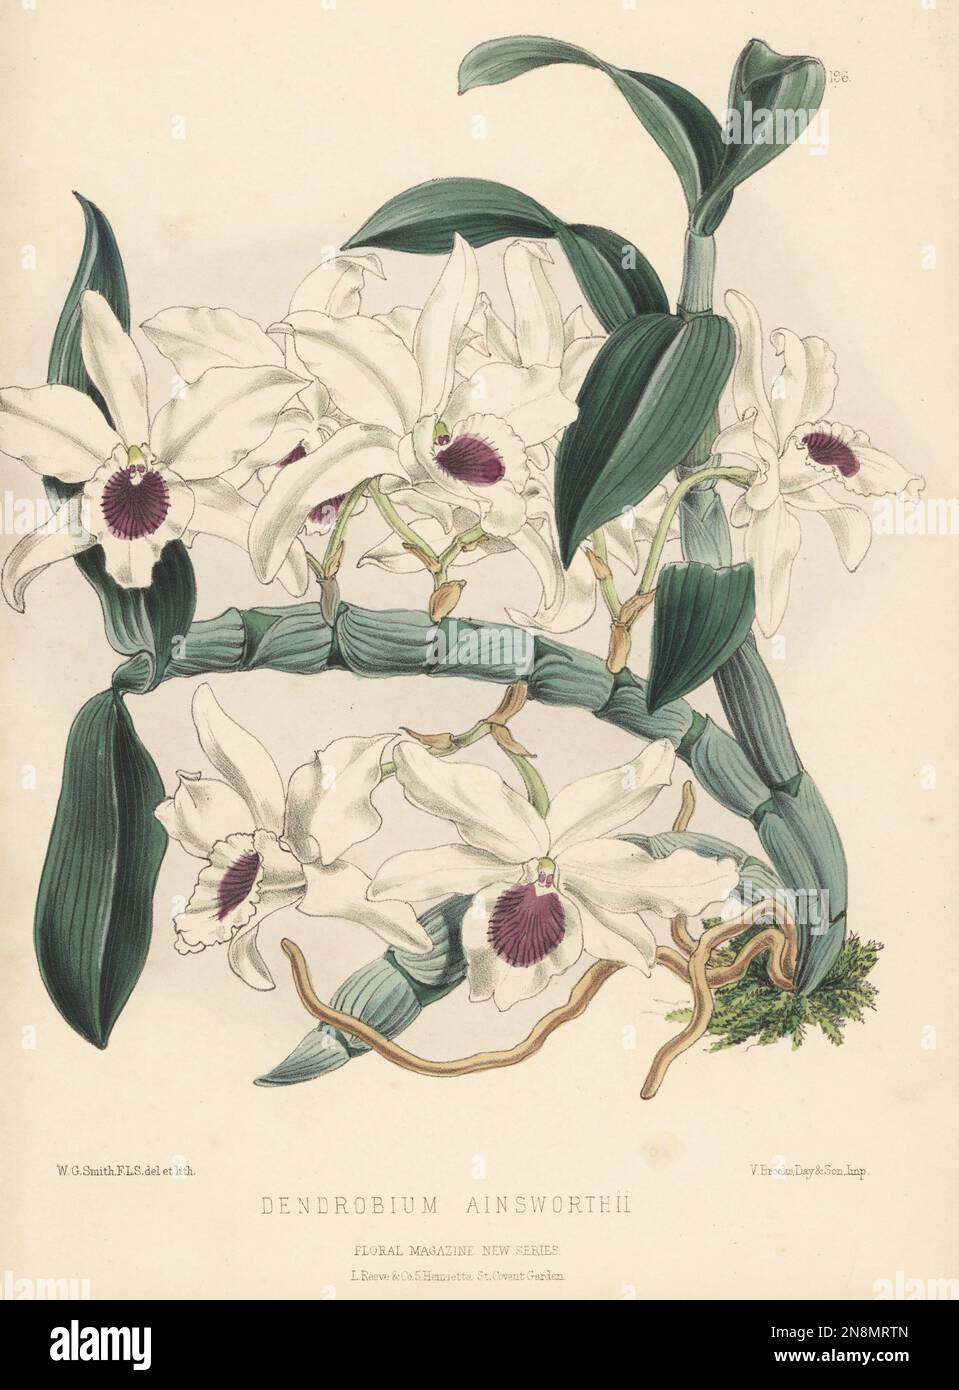 Ainsworth's Dendrobium orchid, Dendrobium x ainsworthii. Hybrid of Dendrobium heterocarpum x Dendrobium nobile raised by Mr Mitchell, Dr. Ainsworth's gardener at Broughton, Manchester. As Dendrobium ainsworthii. Handcolored botanical illustration drawn and lithographed by Worthington George Smith from Henry Honywood Dombrain's Floral Magazine, New Series, Volume 5, L. Reeve, London, 1876. Lithograph printed by Vincent Brooks, Day & Son. Stock Photo